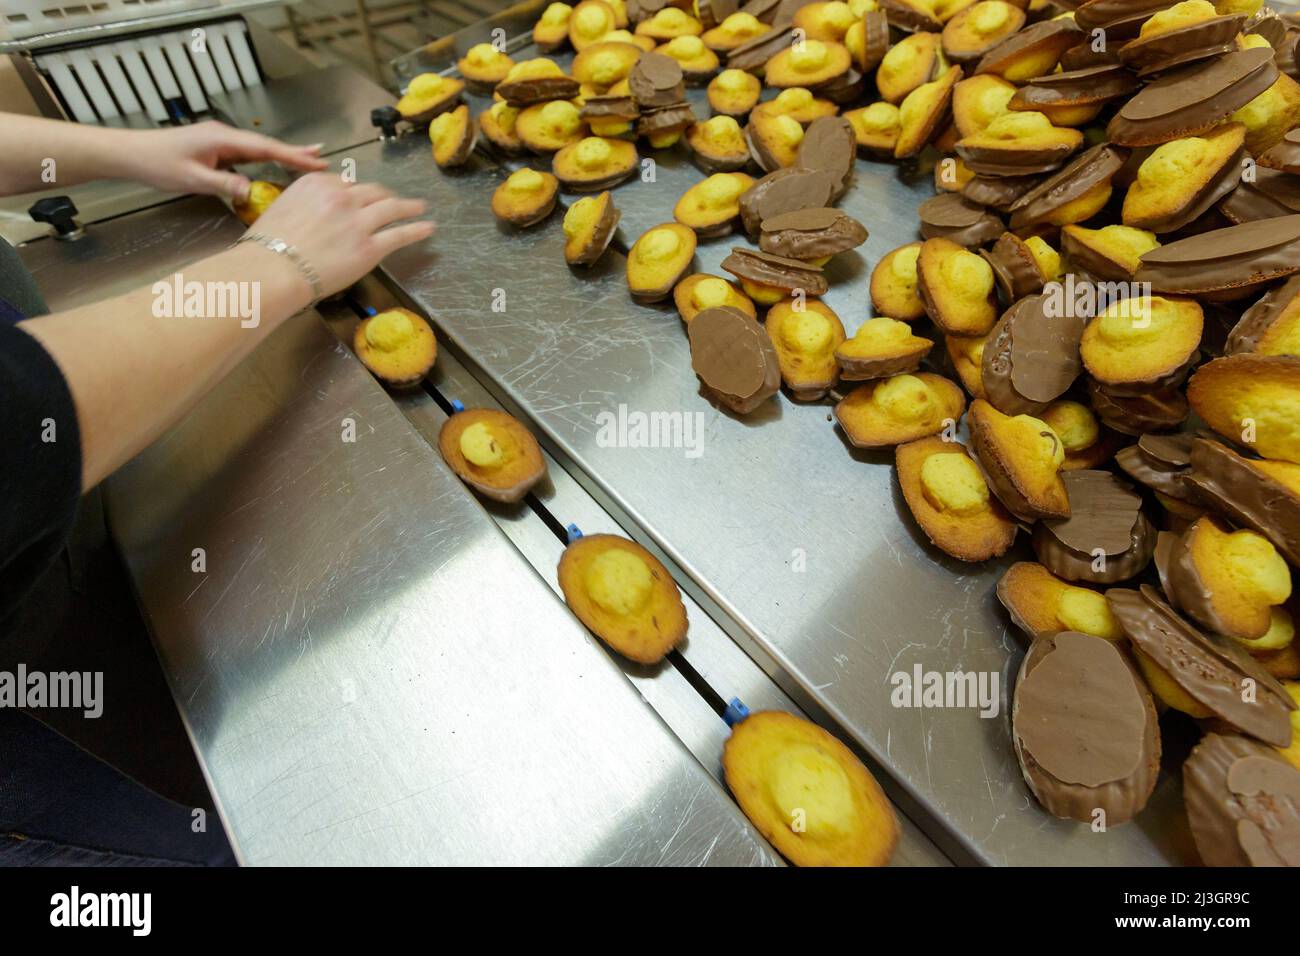 France, Meuse, Commercy, packing station for the madeleines of the shop and workshop for the manufacture of madeleines of Commercy La Boite à Madeleines of the Zins brothers, madeleiniers since 1951 Stock Photo